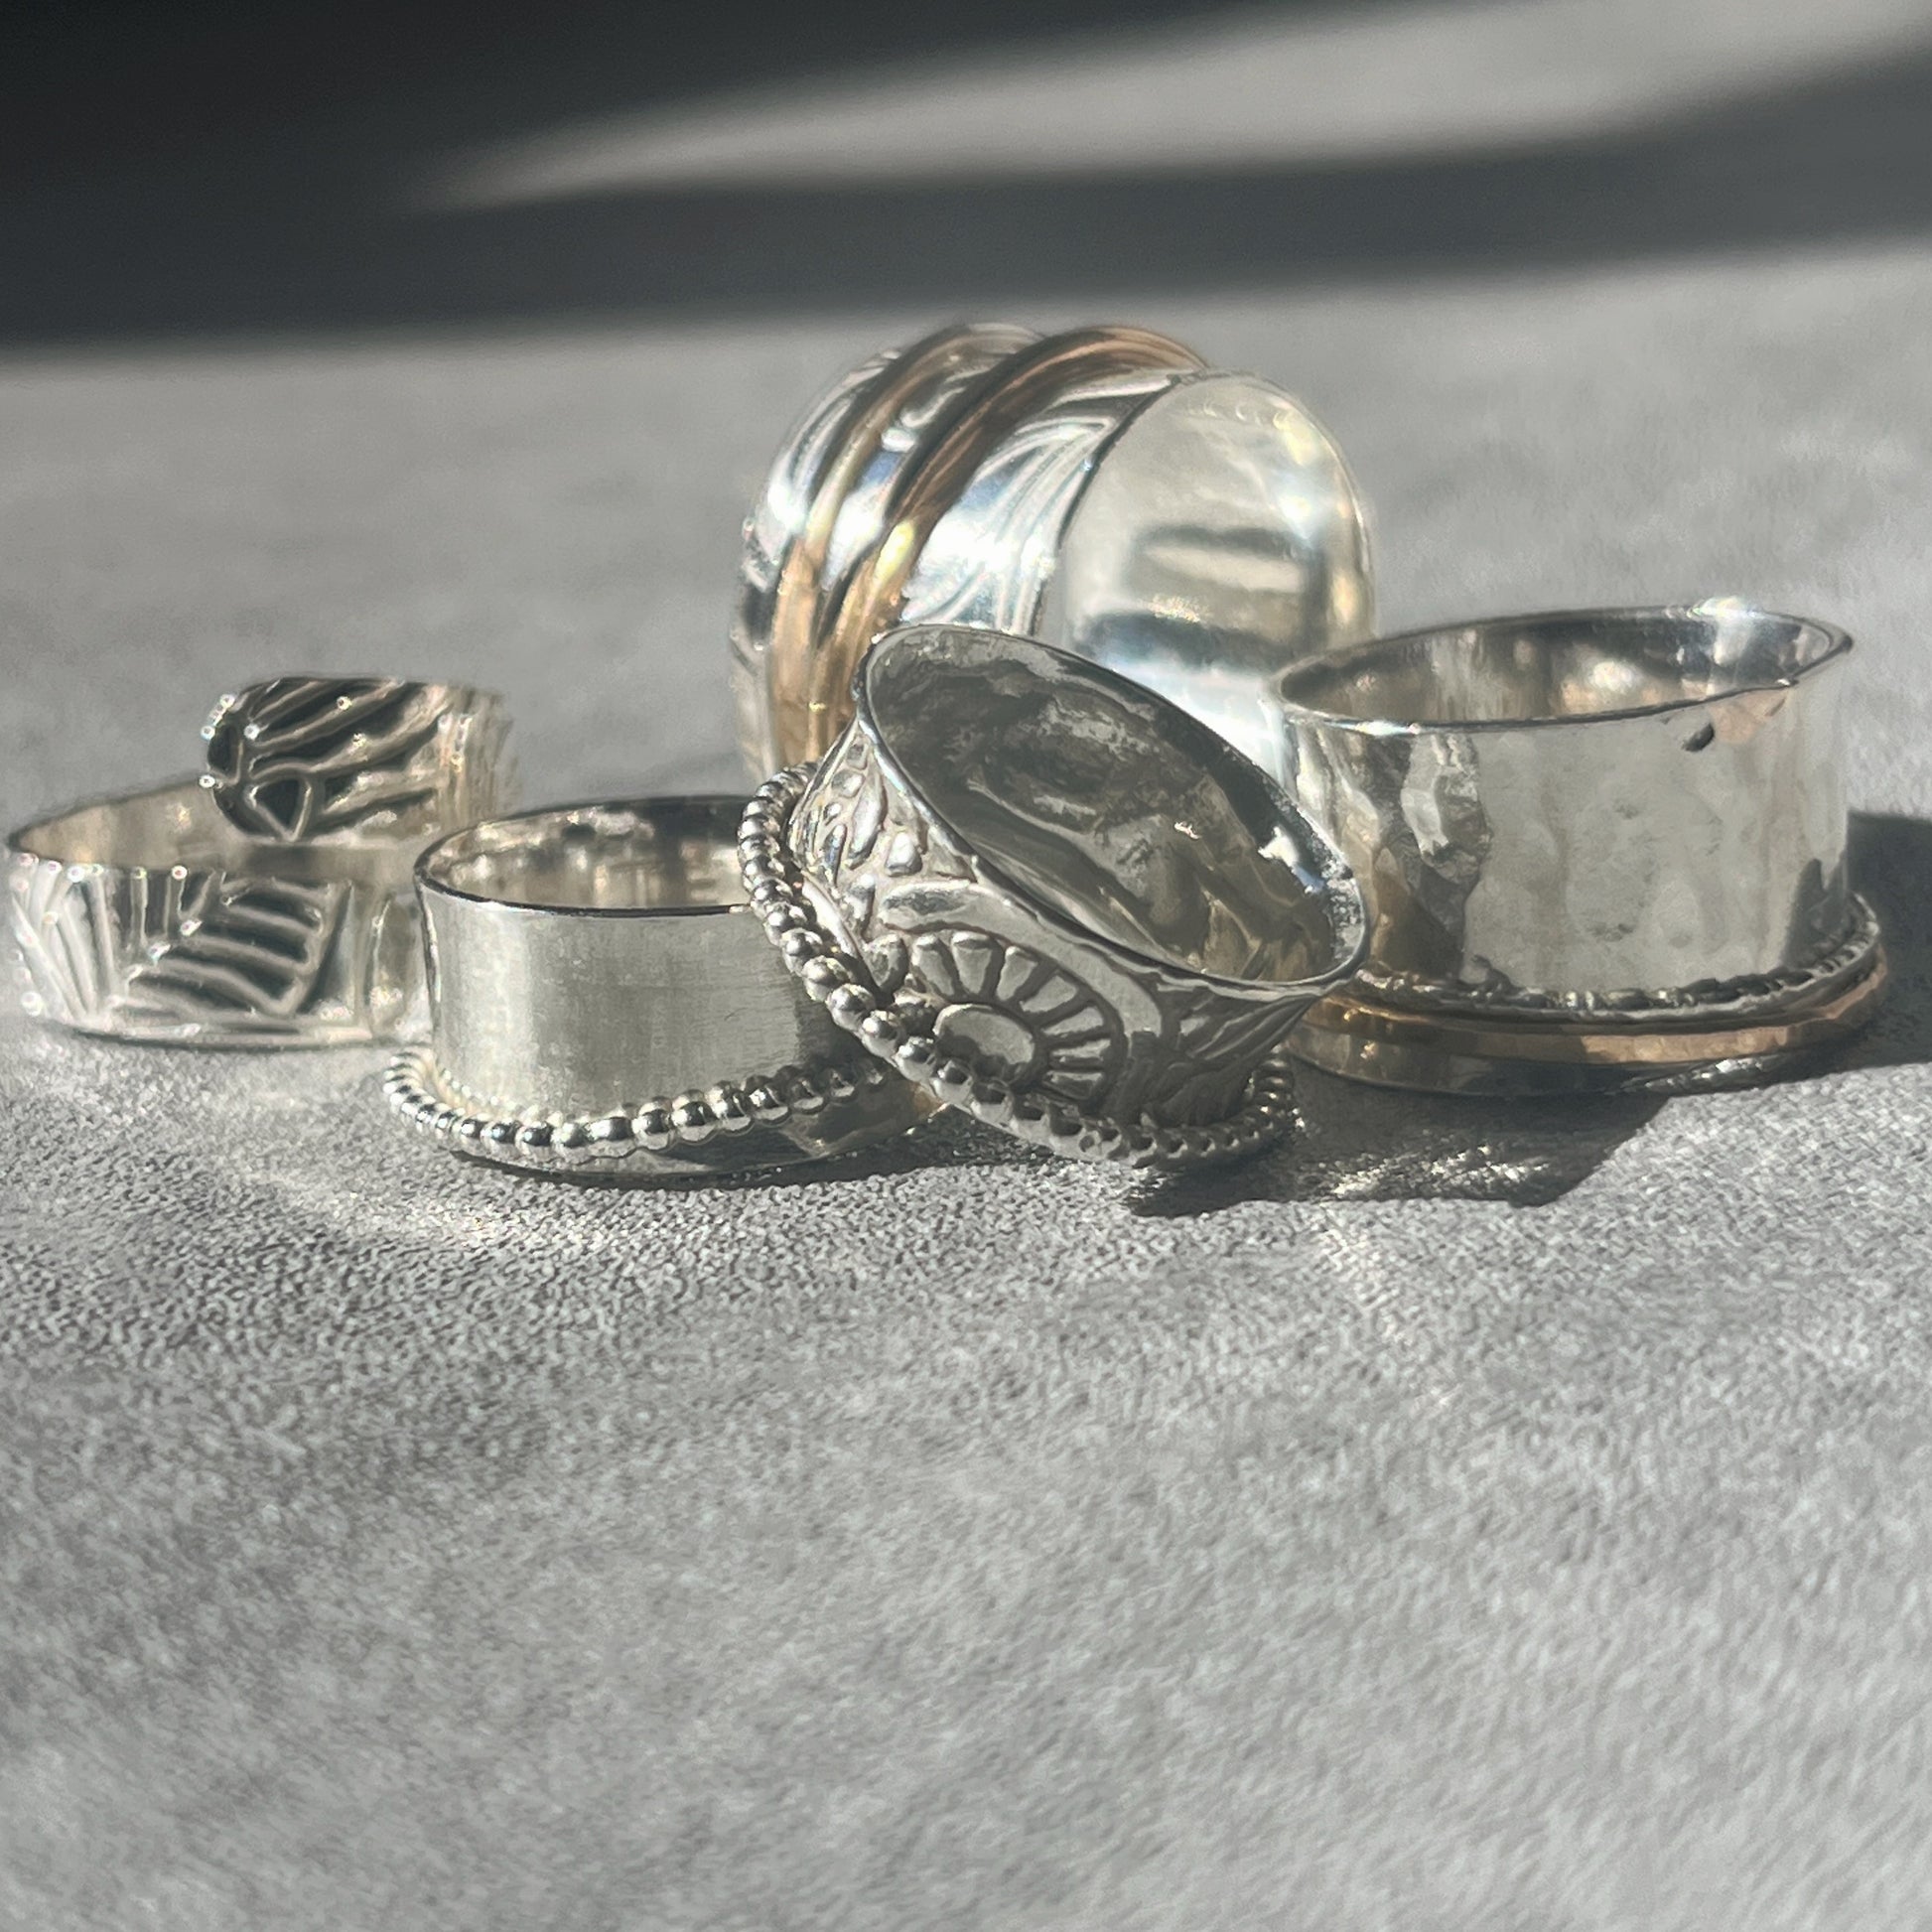 a collection of five various spinner rings some with gold filled outer rings some with silver outer spinner rings all patterned